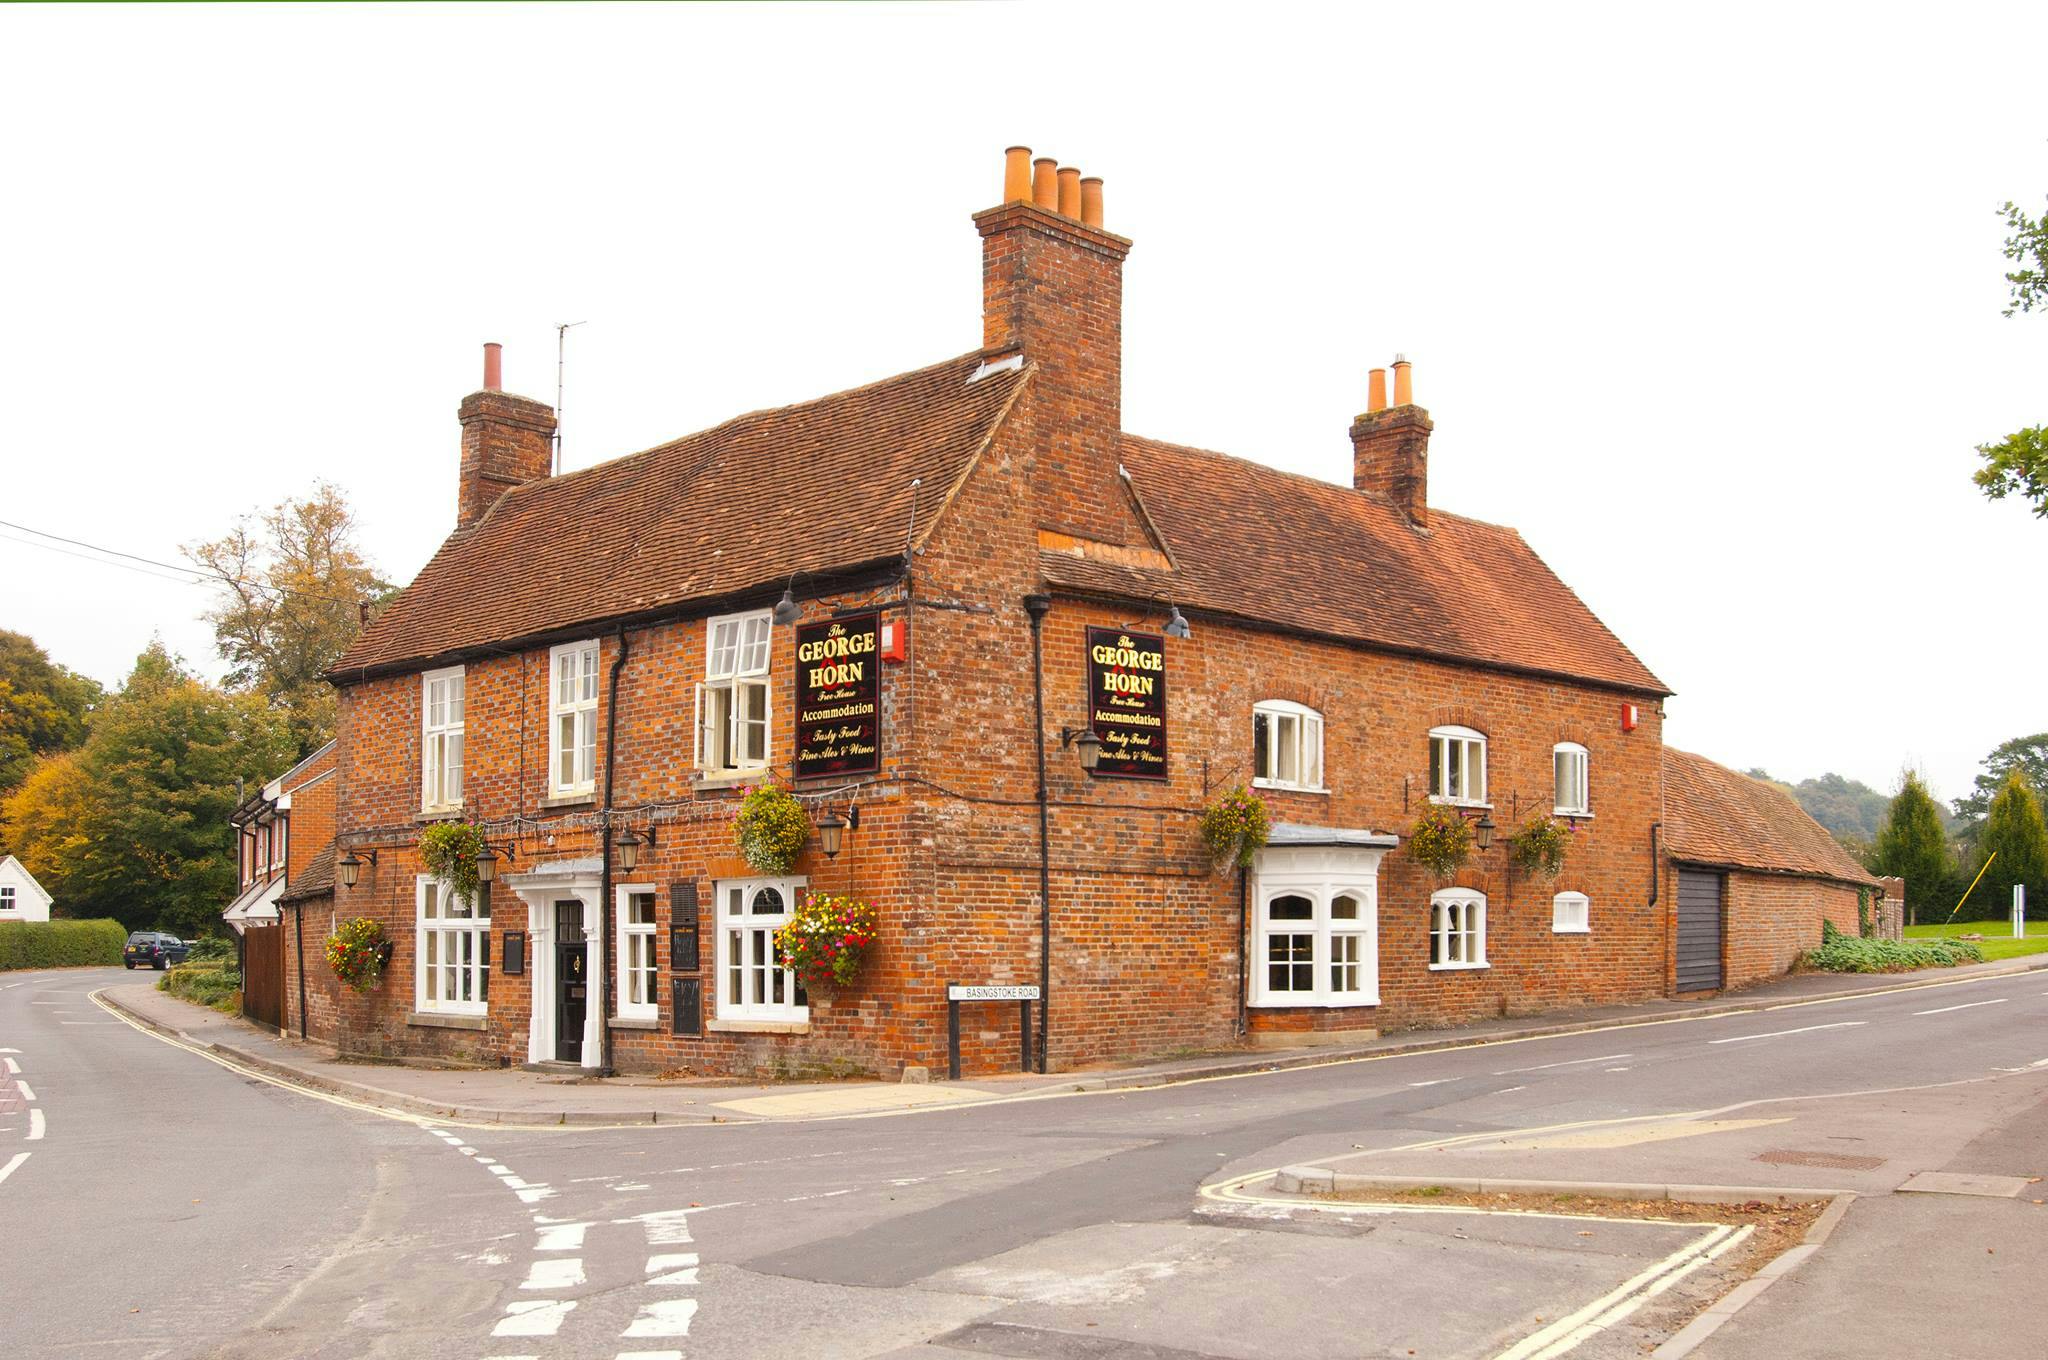 Photo of George & Horn, Kingsclere